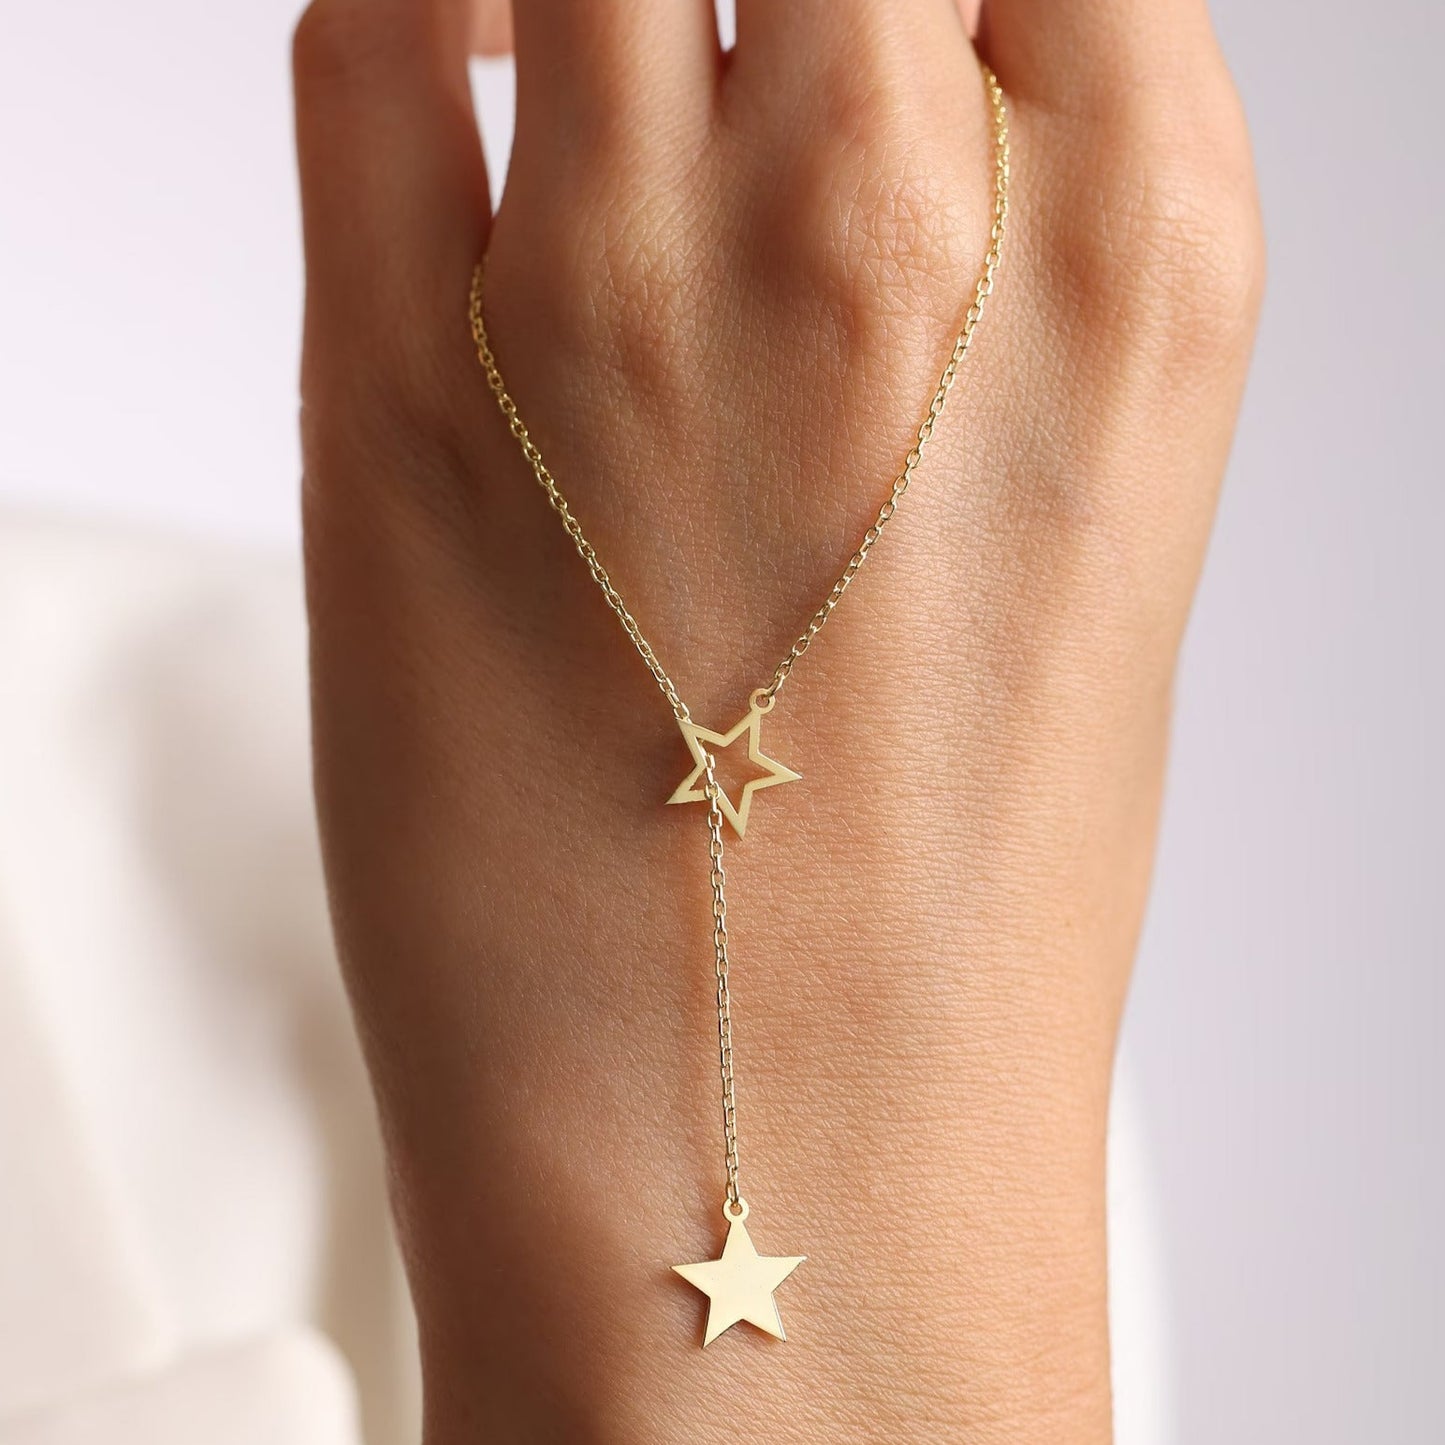 Captivate the night with our 18 Carat Gold Tiny Star Name Necklace - Burst of Arabia. A stellar symphony inspired by the enchanting tales of Arabic constellations